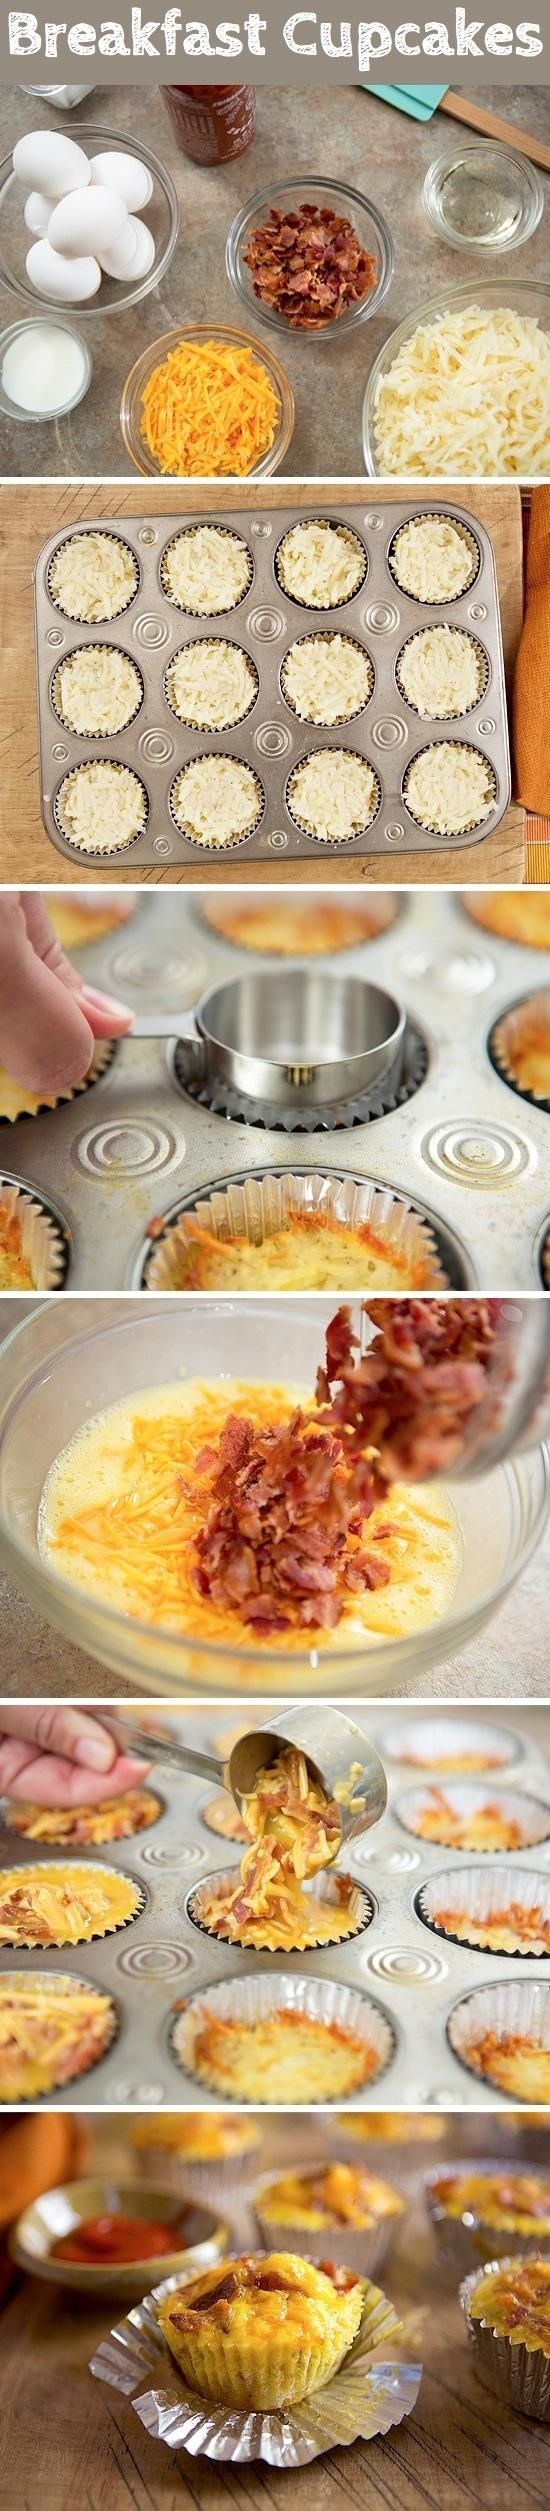 Breakfast Cupcakes–replace